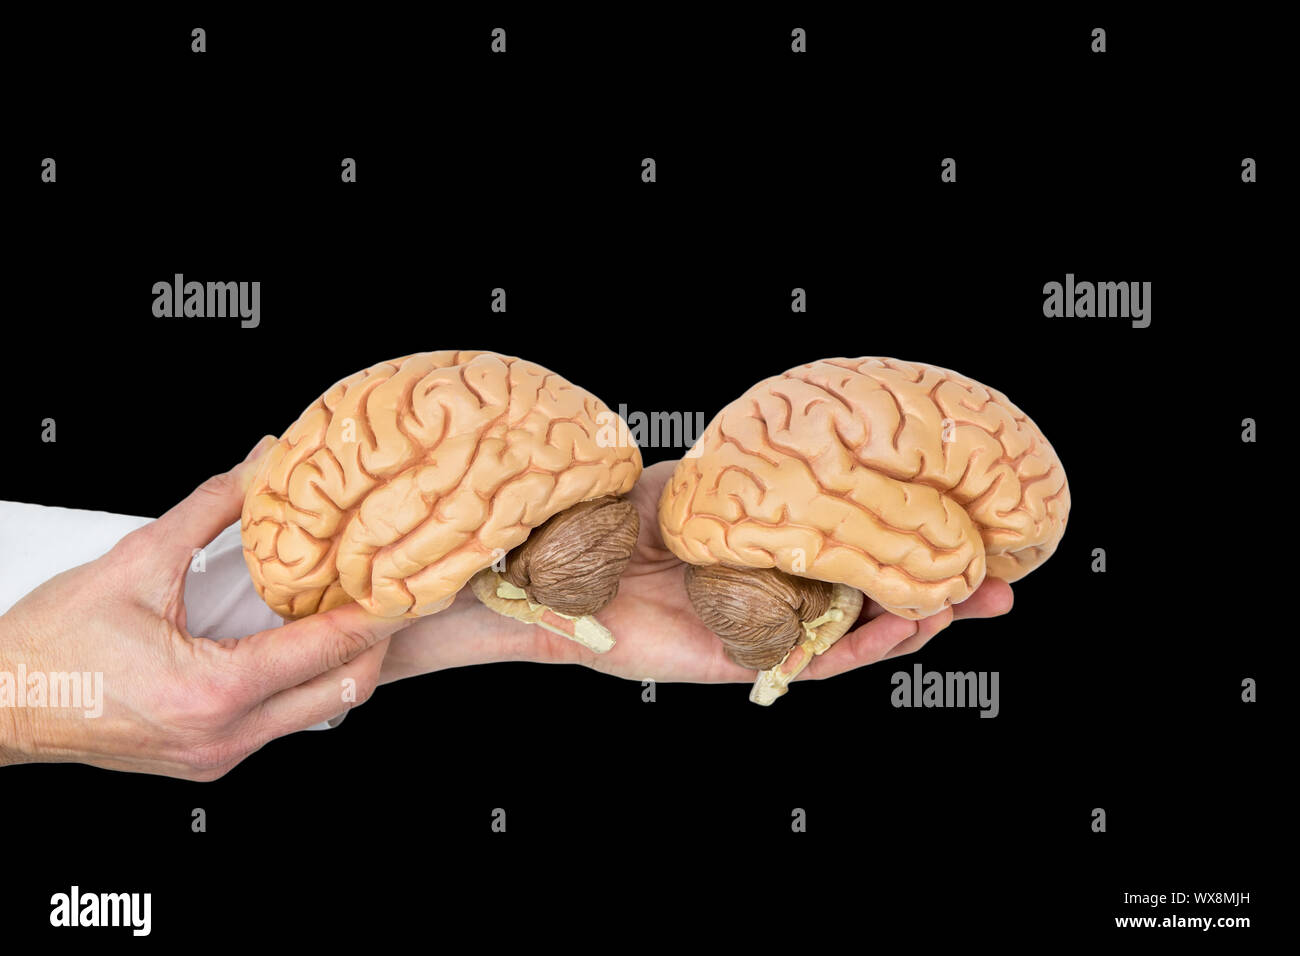 Hands hold human brains model on black background Stock Photo